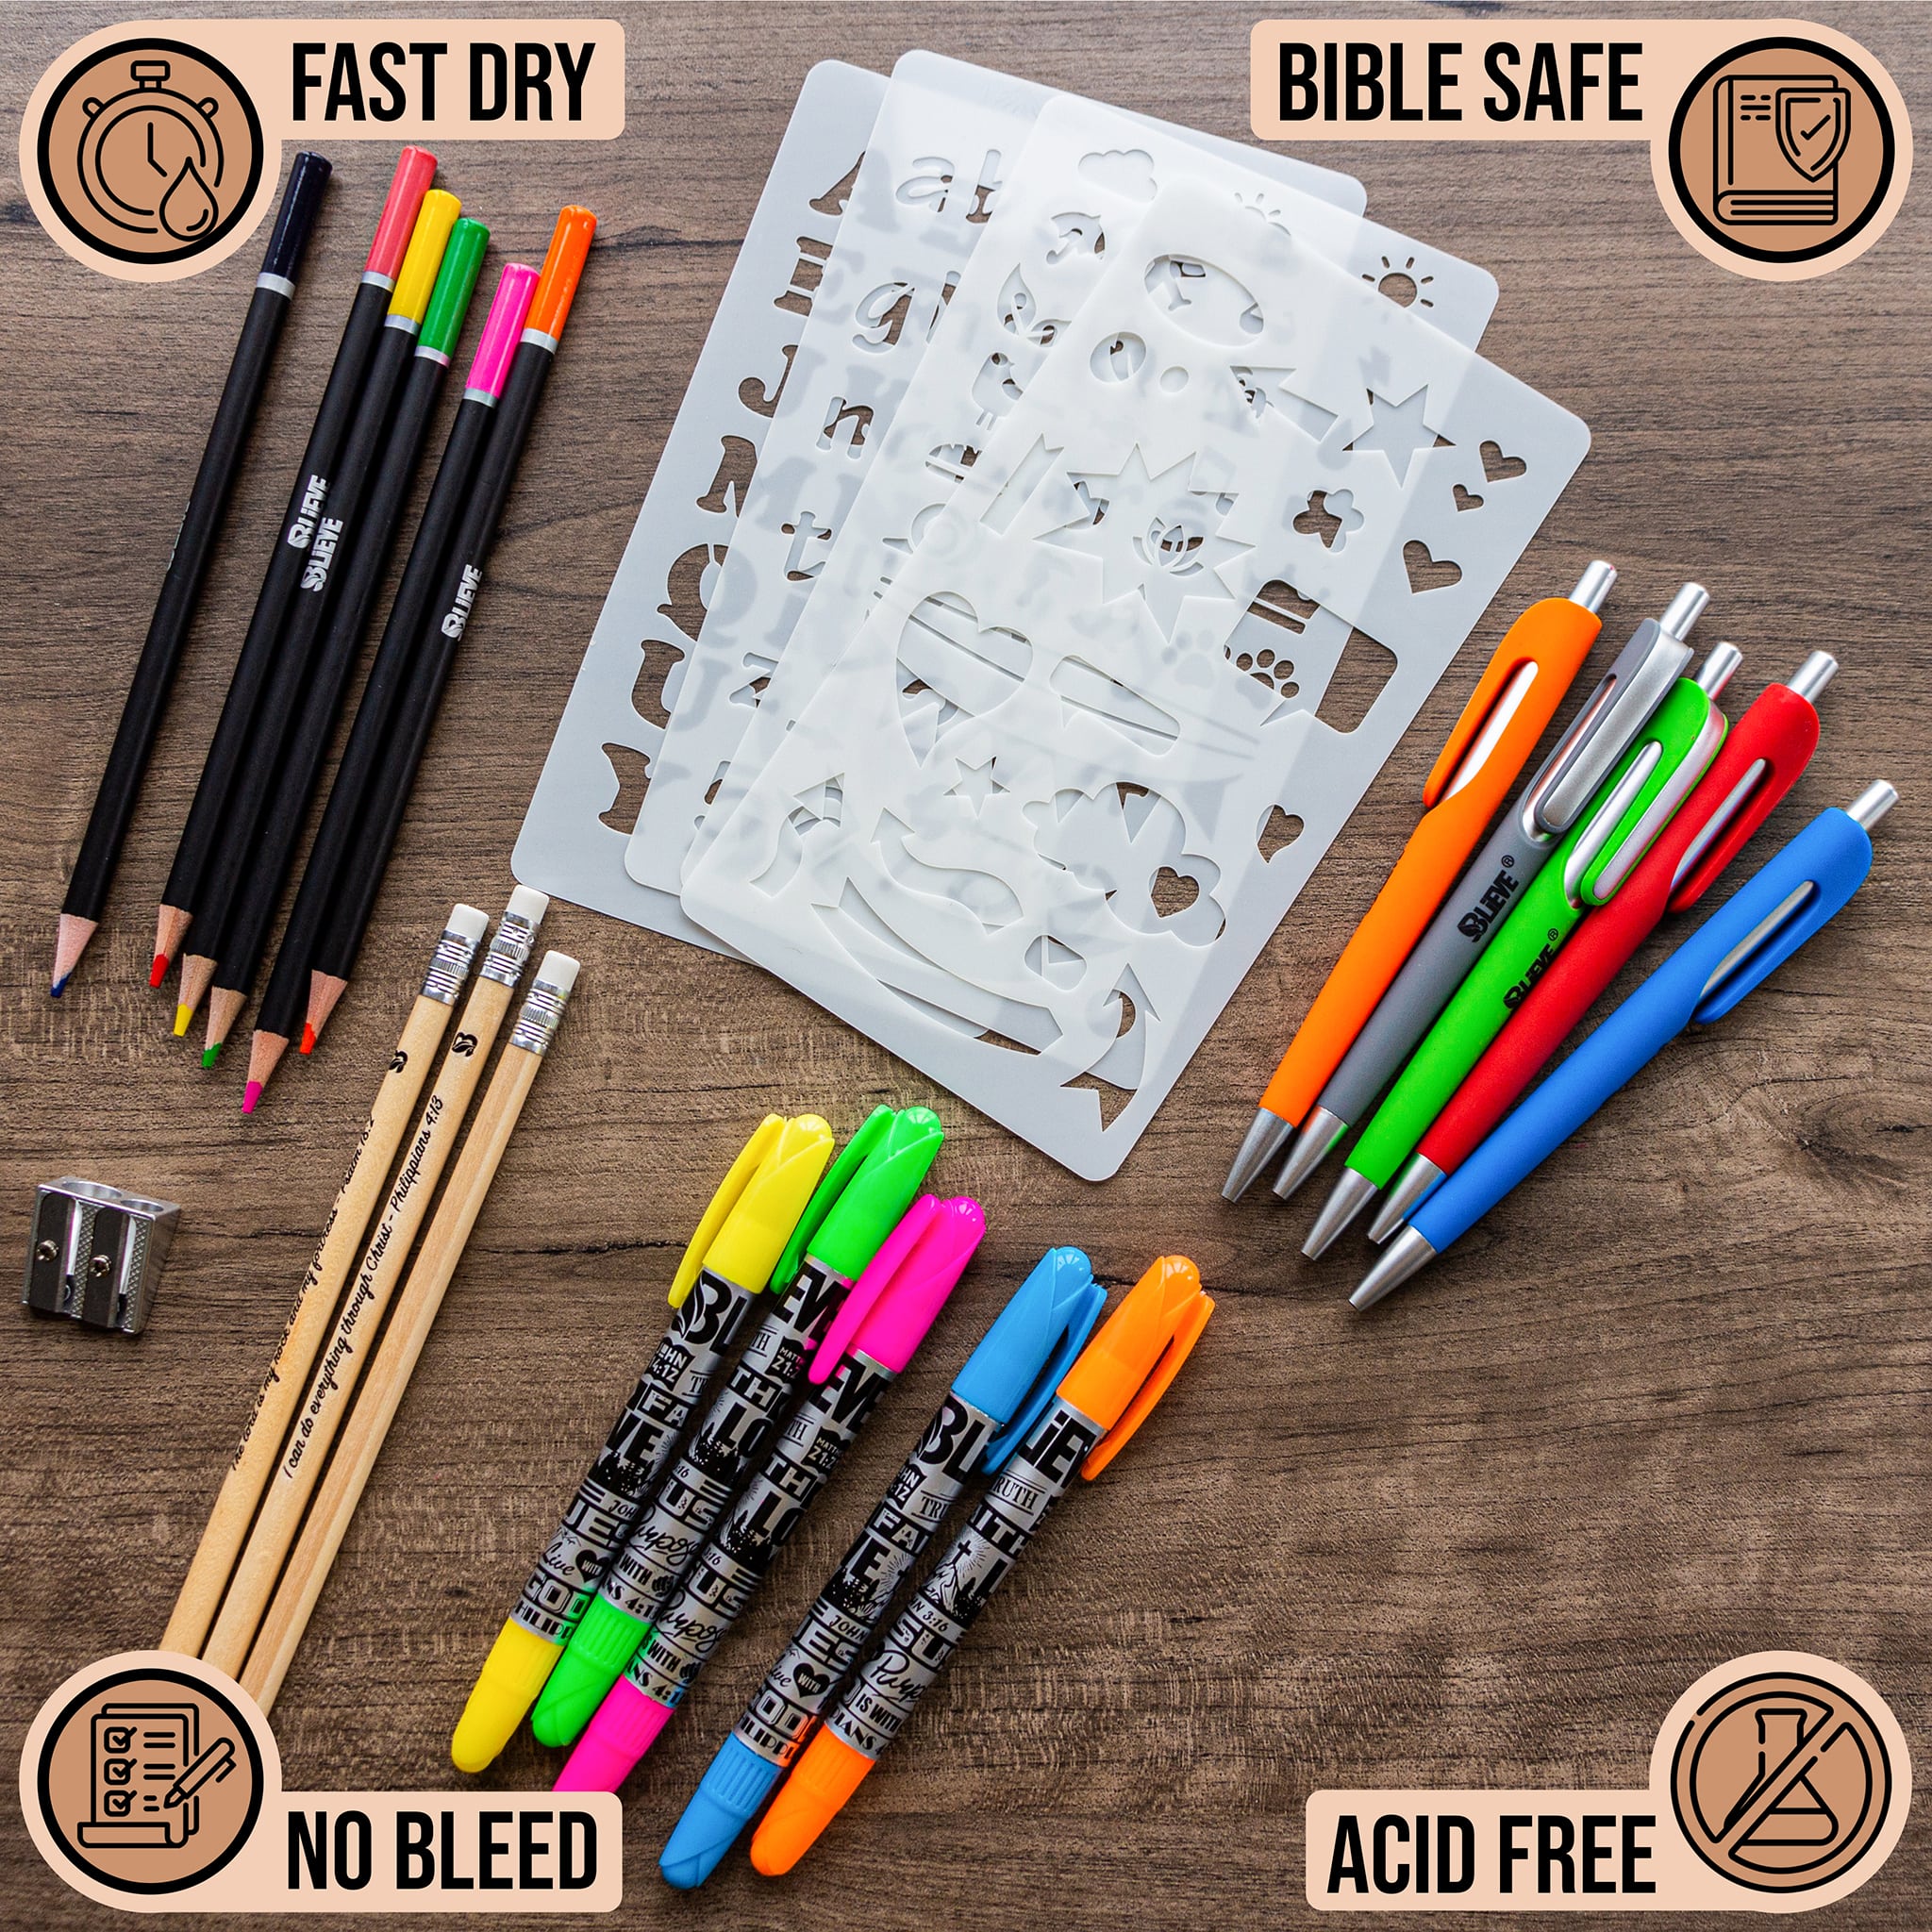 My Favorite Journaling Supplies - Taz and Belly  Bible journaling  supplies, Bible art journaling, Bible journaling